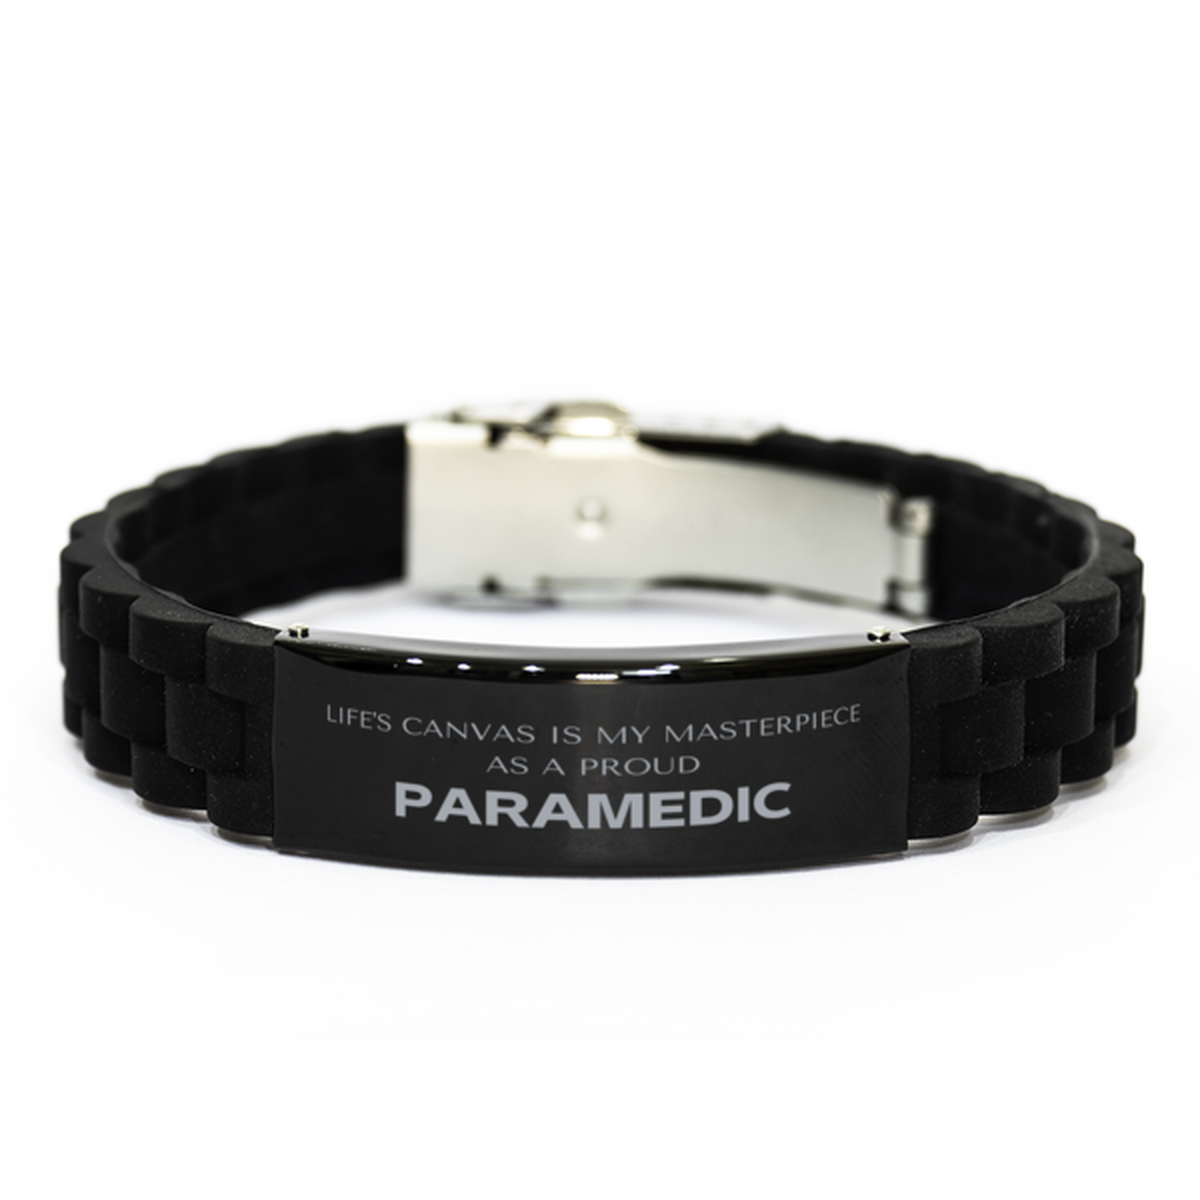 Proud Paramedic Gifts, Life's canvas is my masterpiece, Epic Birthday Christmas Unique Black Glidelock Clasp Bracelet For Paramedic, Coworkers, Men, Women, Friends